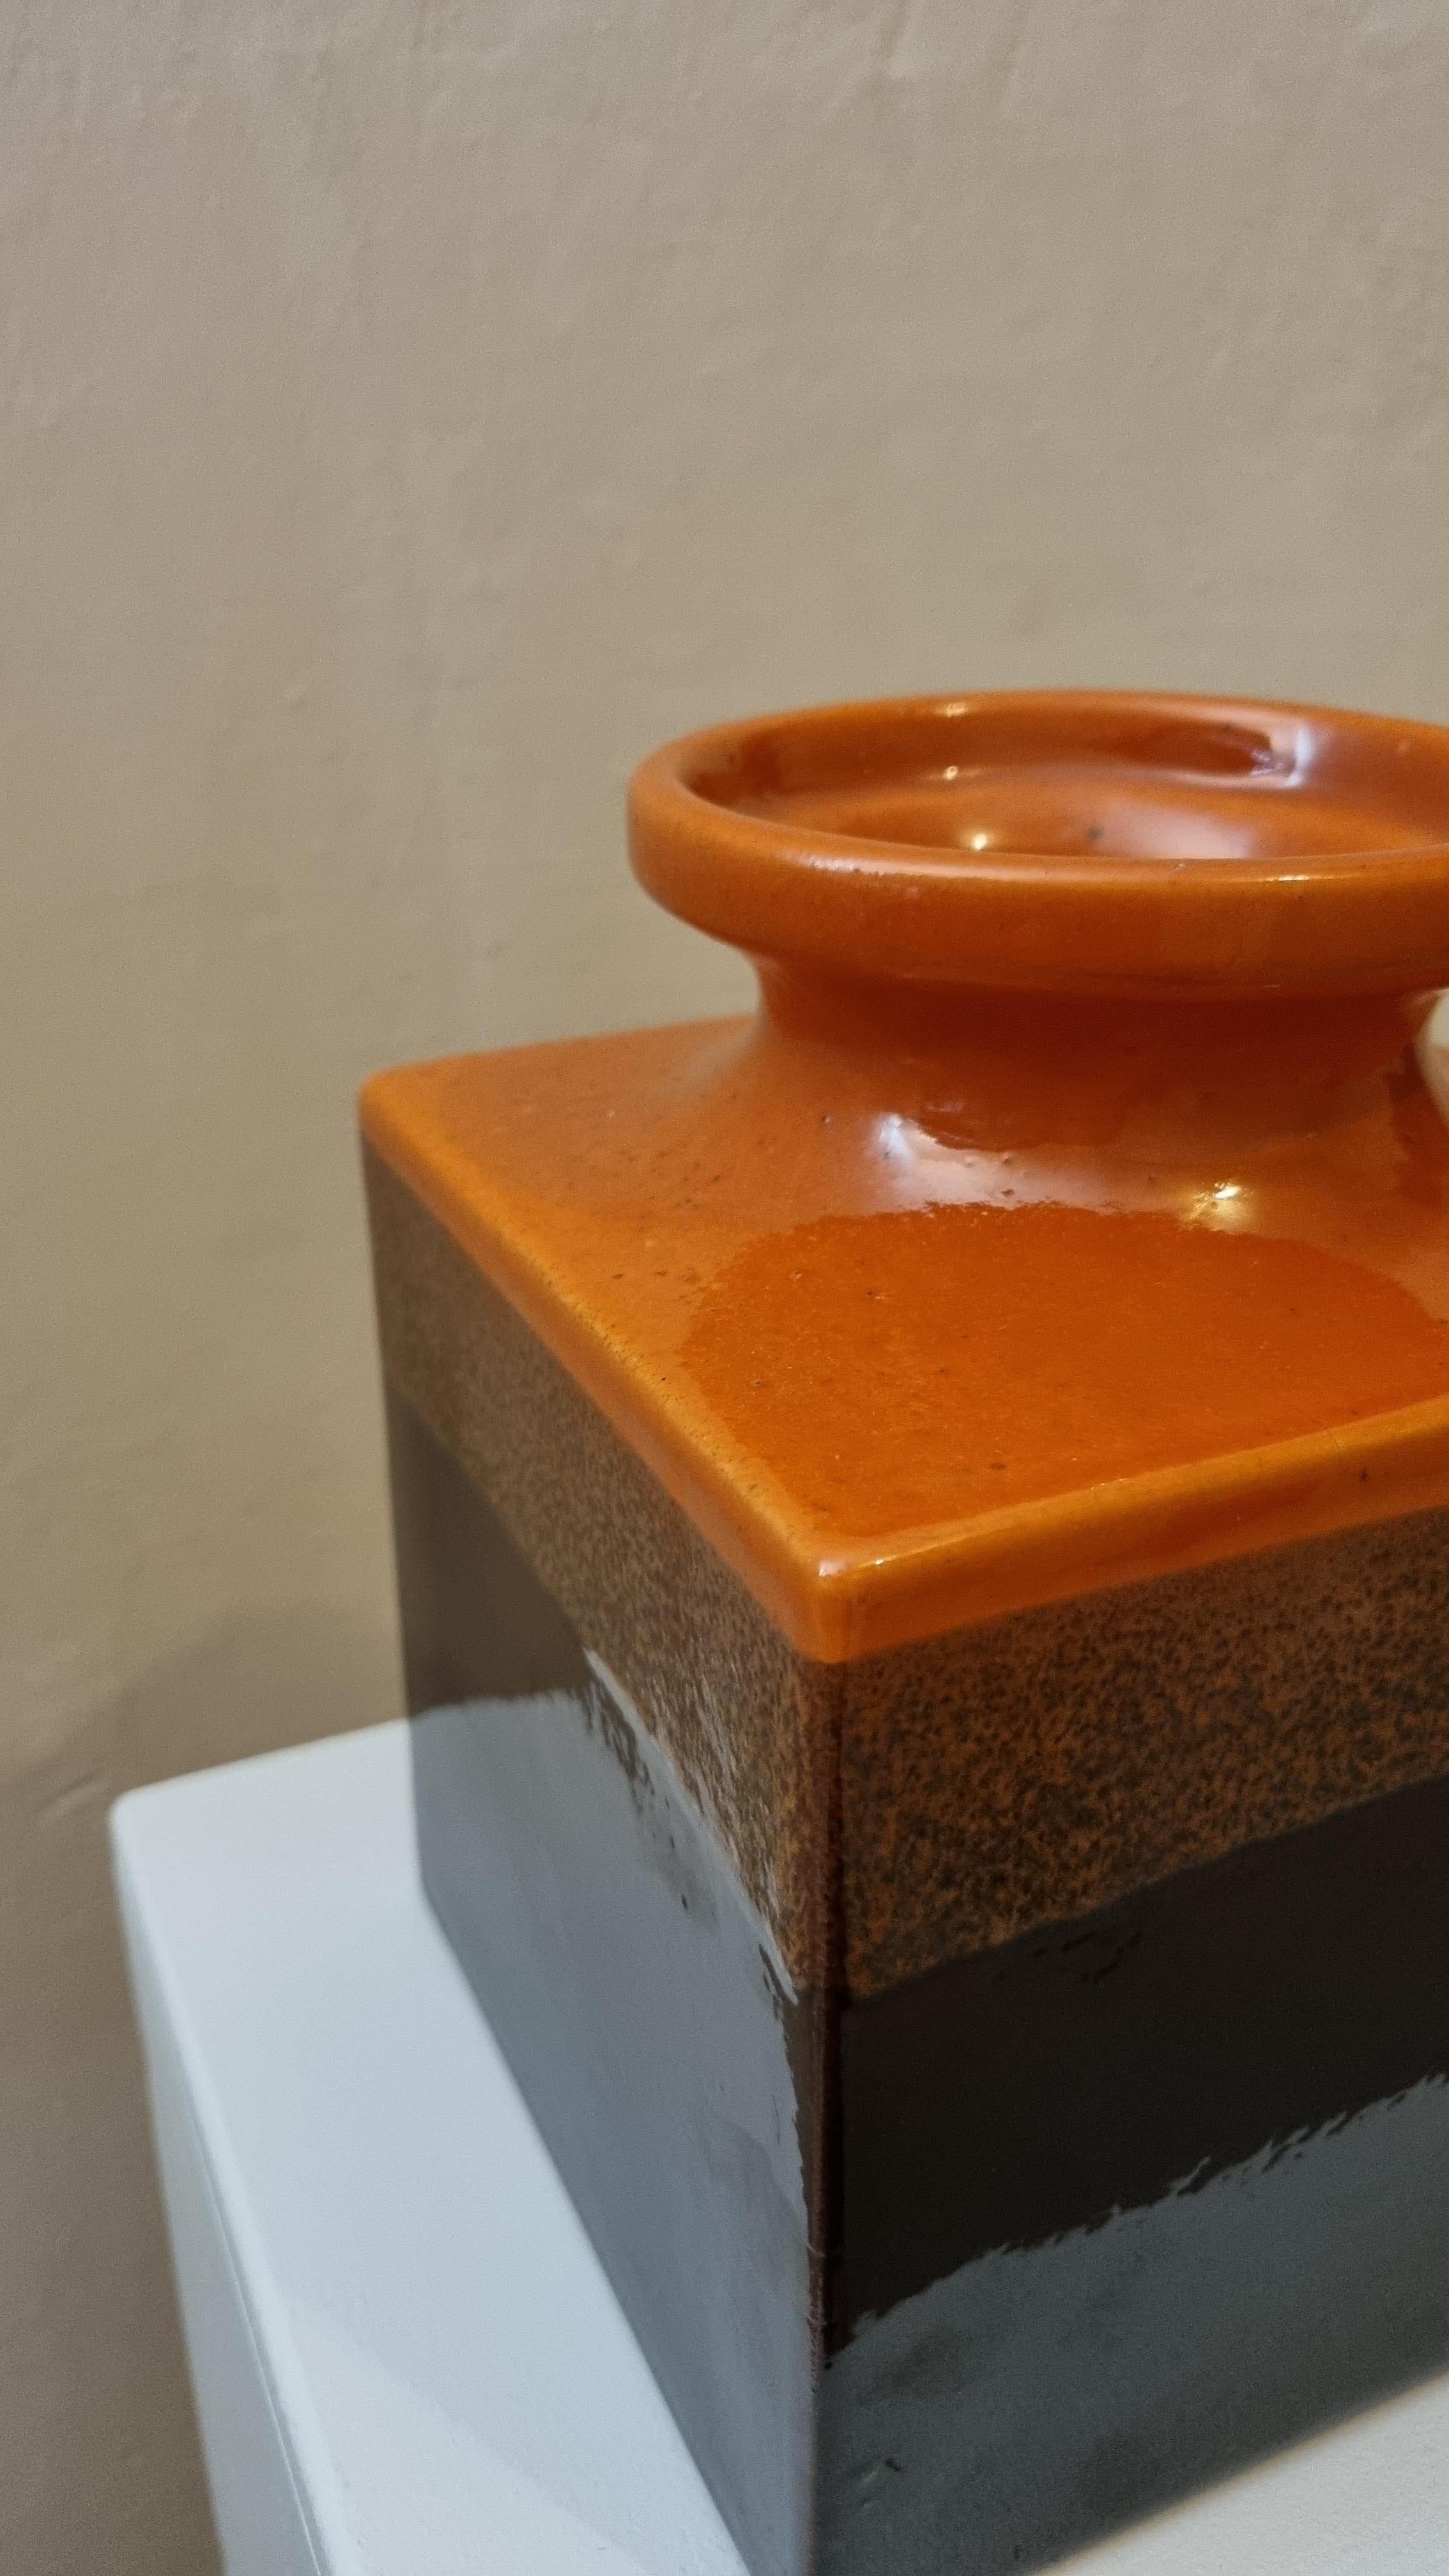 Ceramic planter produced by Ceramiche Bitossi Montelupo, 70s.
Terracotta, pictorial decoration.
Each work created by Bitossi follows a very complex working process, both in the formal and decorative part.
The realization of a ceramic work can be